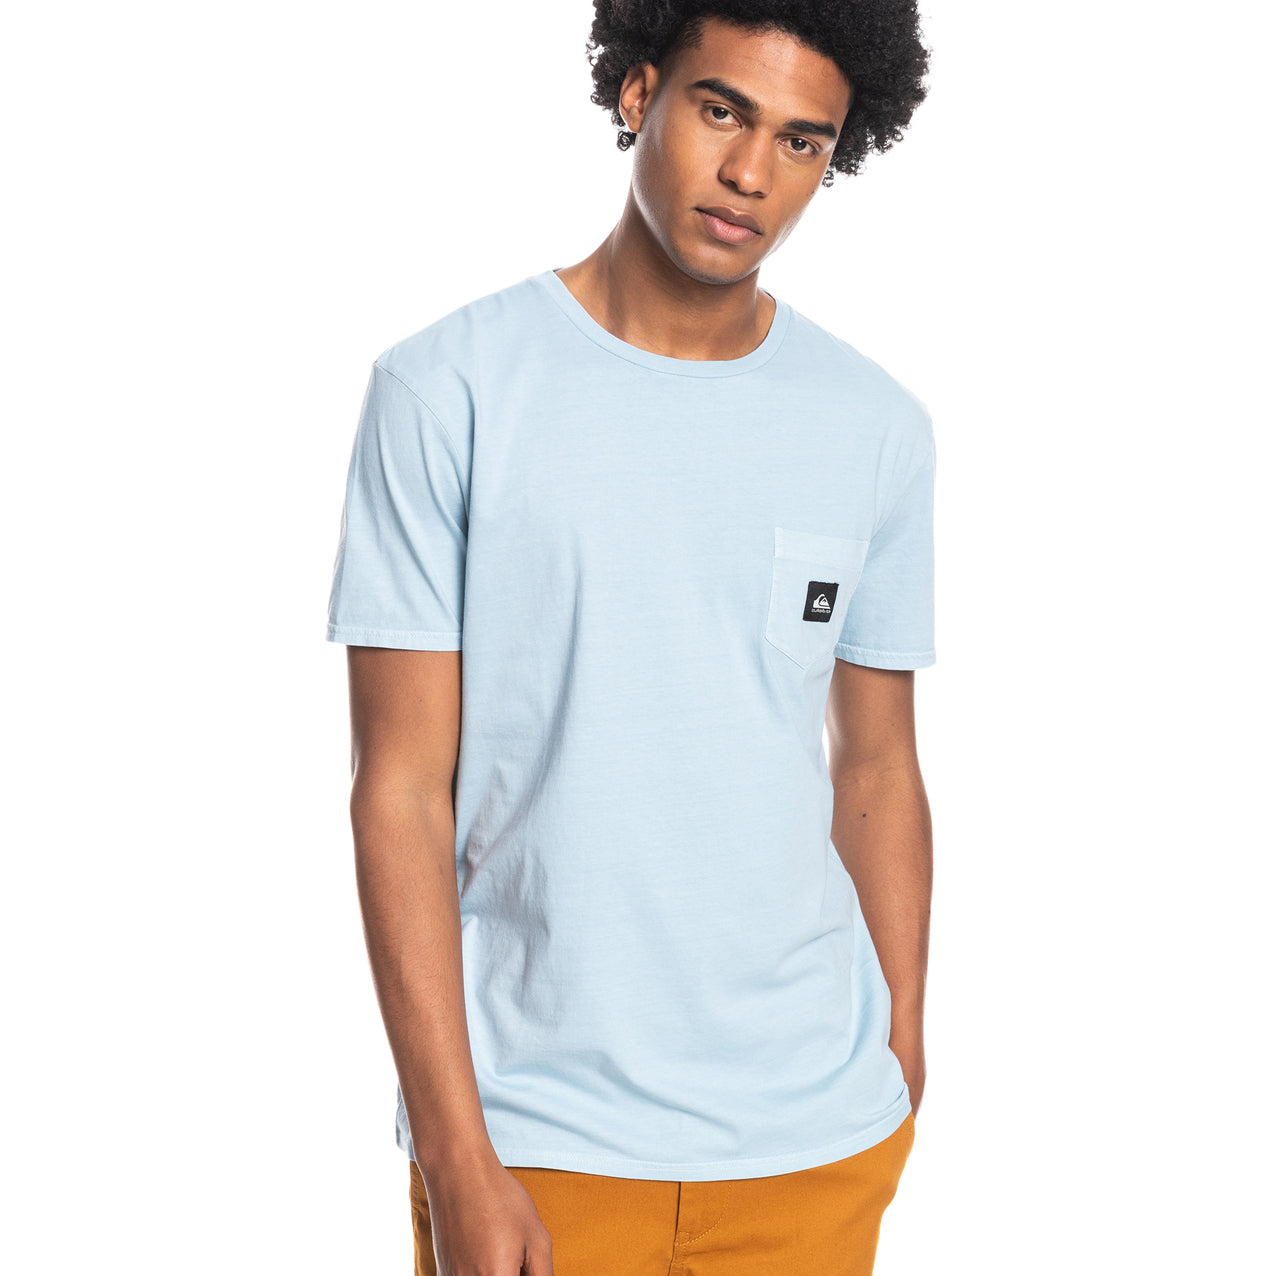 Quiksilver Sub Missions SS Tee BFA0 S